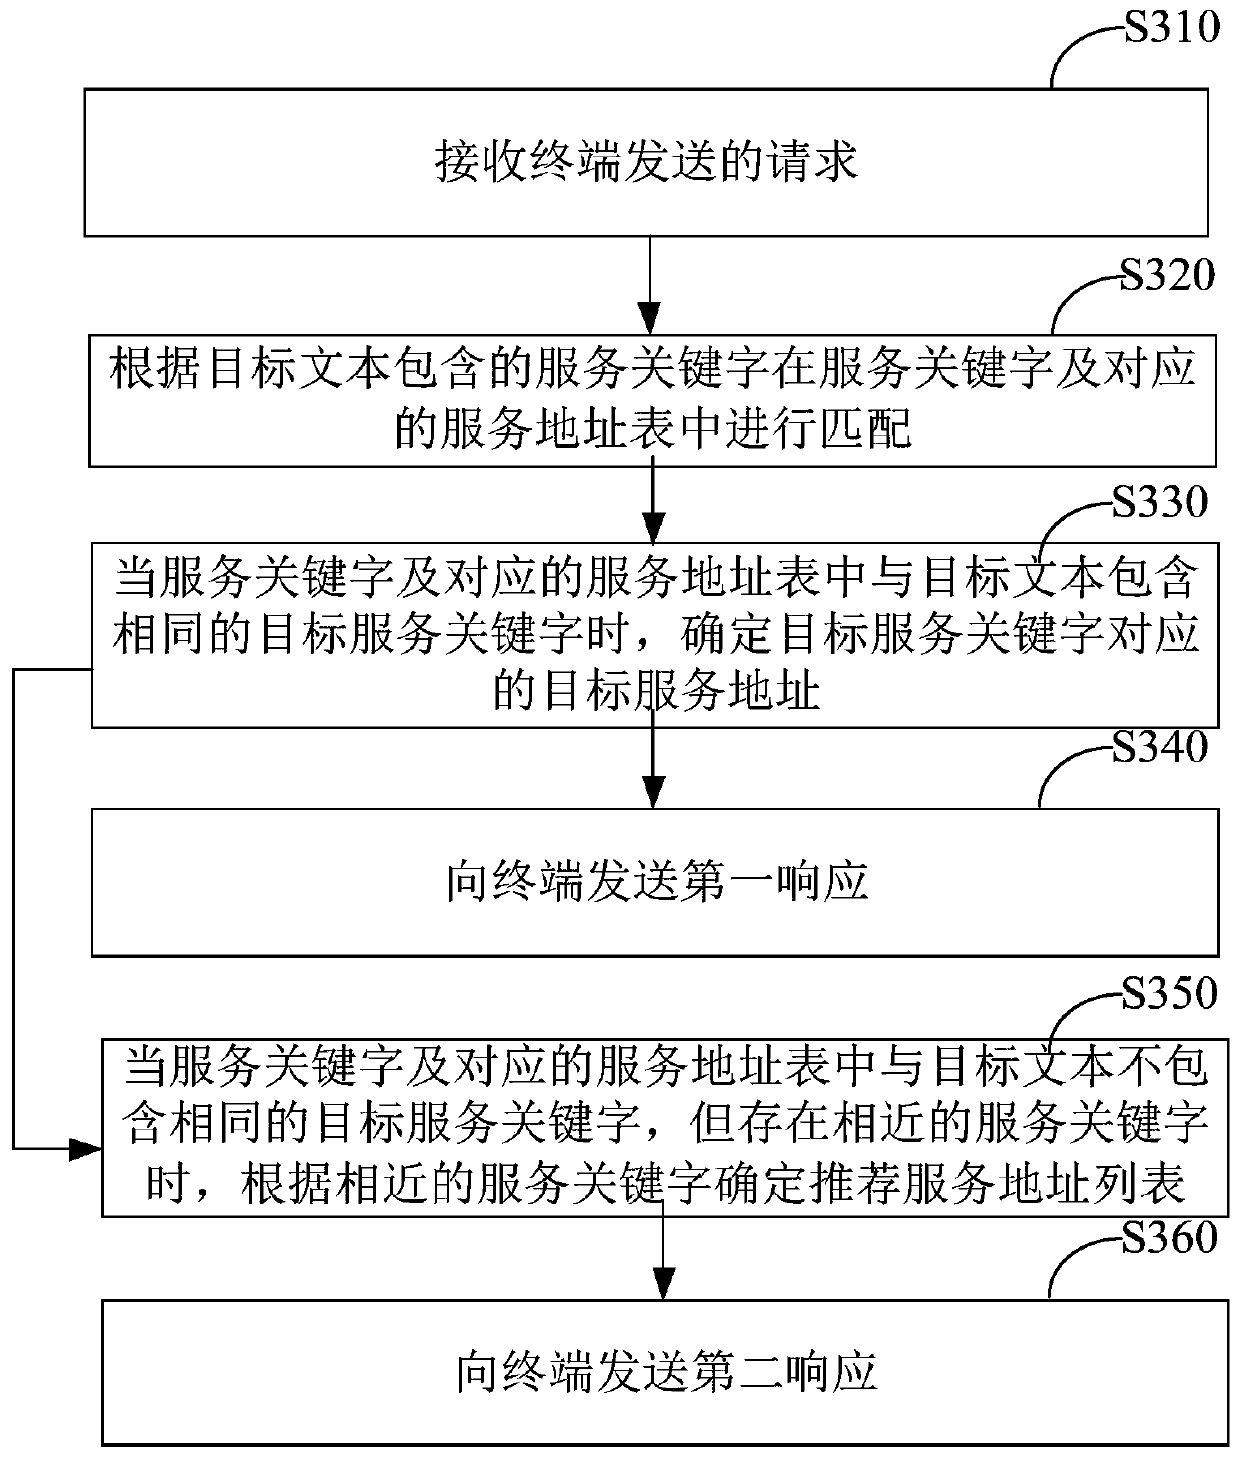 Speech recognition-based service request method, service request device and computer equipment